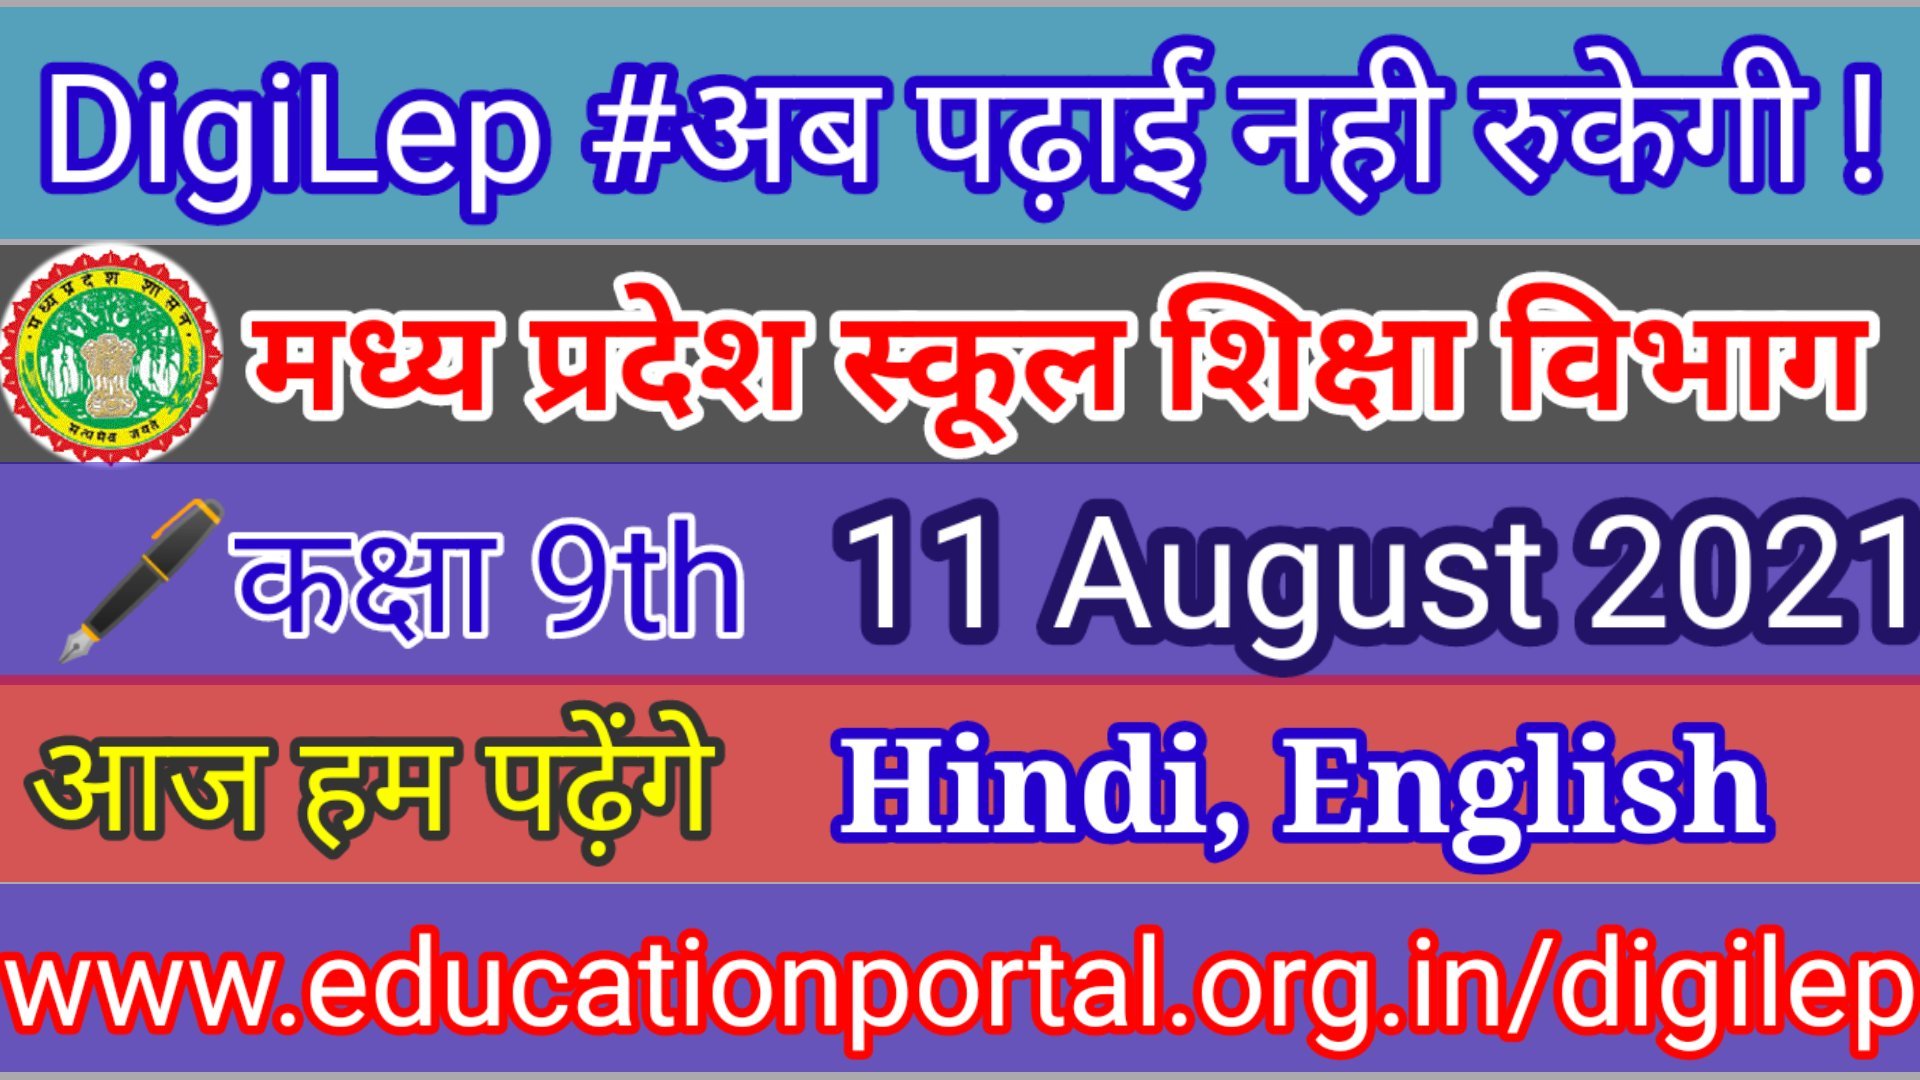 Digital class 9th 11th August 2021 Hindi and English